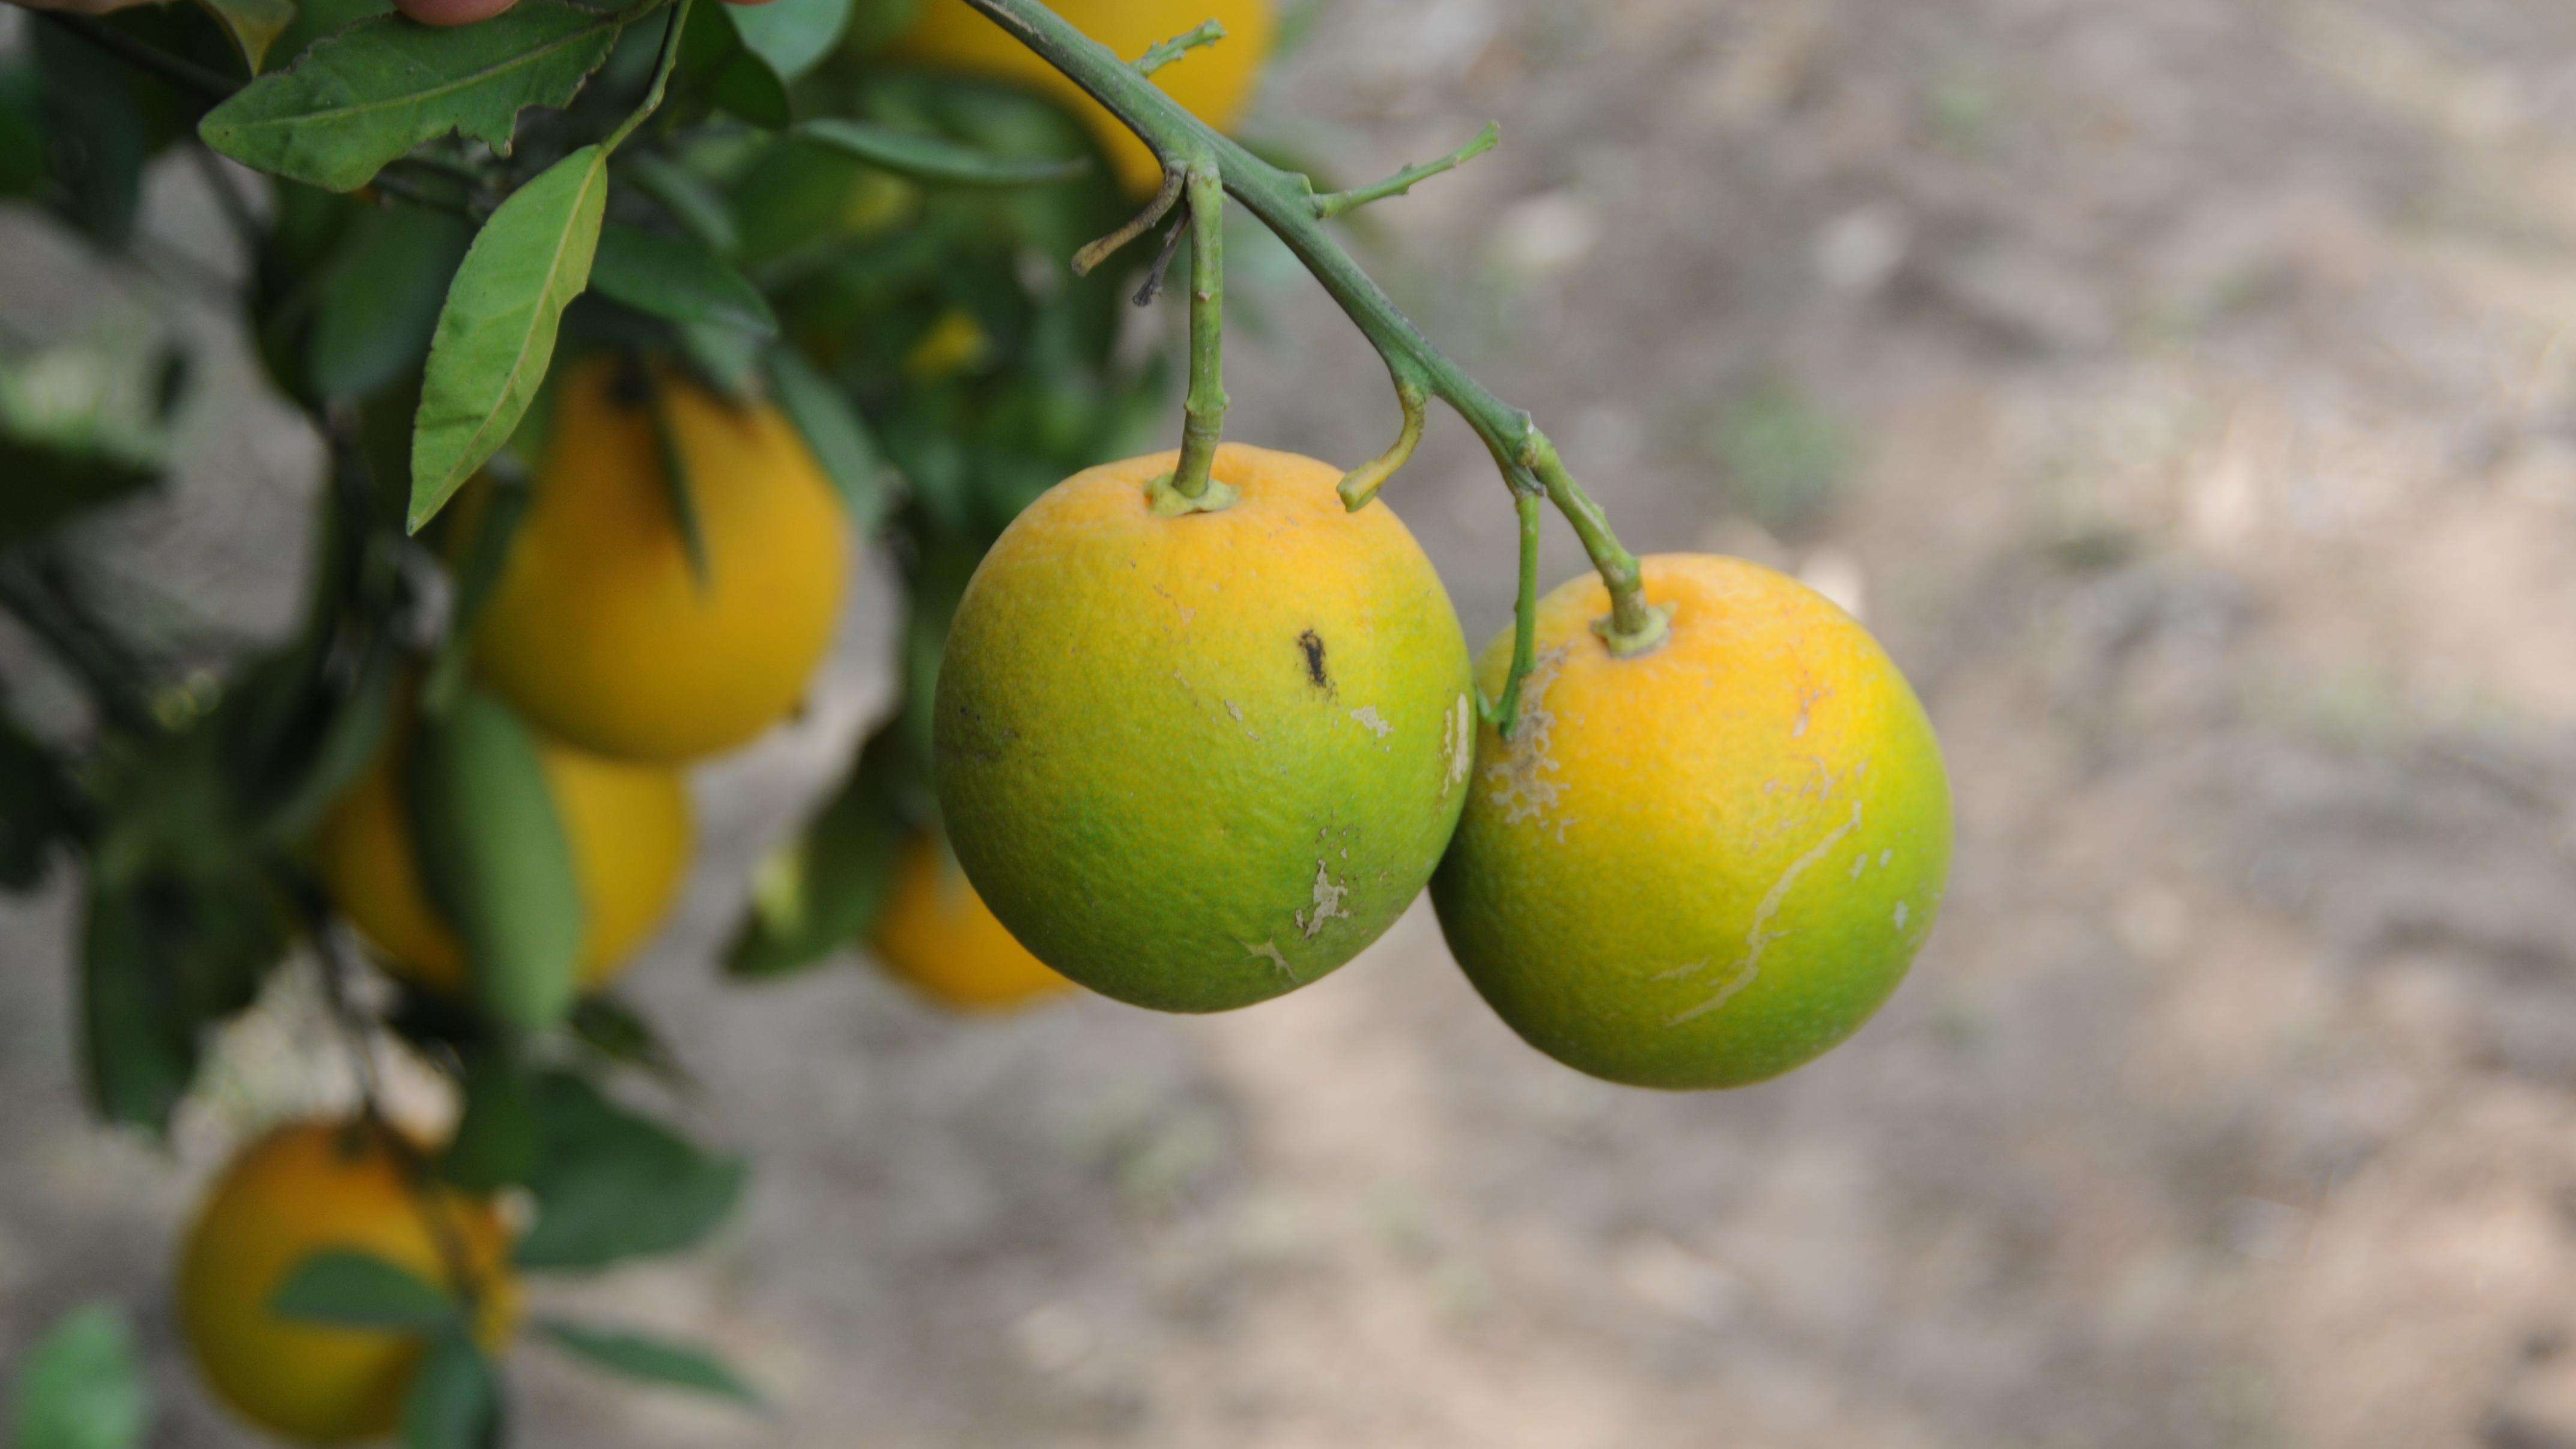 Abnormally small oranges on a branch. The fruit is orange at the top near the stem but gradually changes to dark green on the bottom.